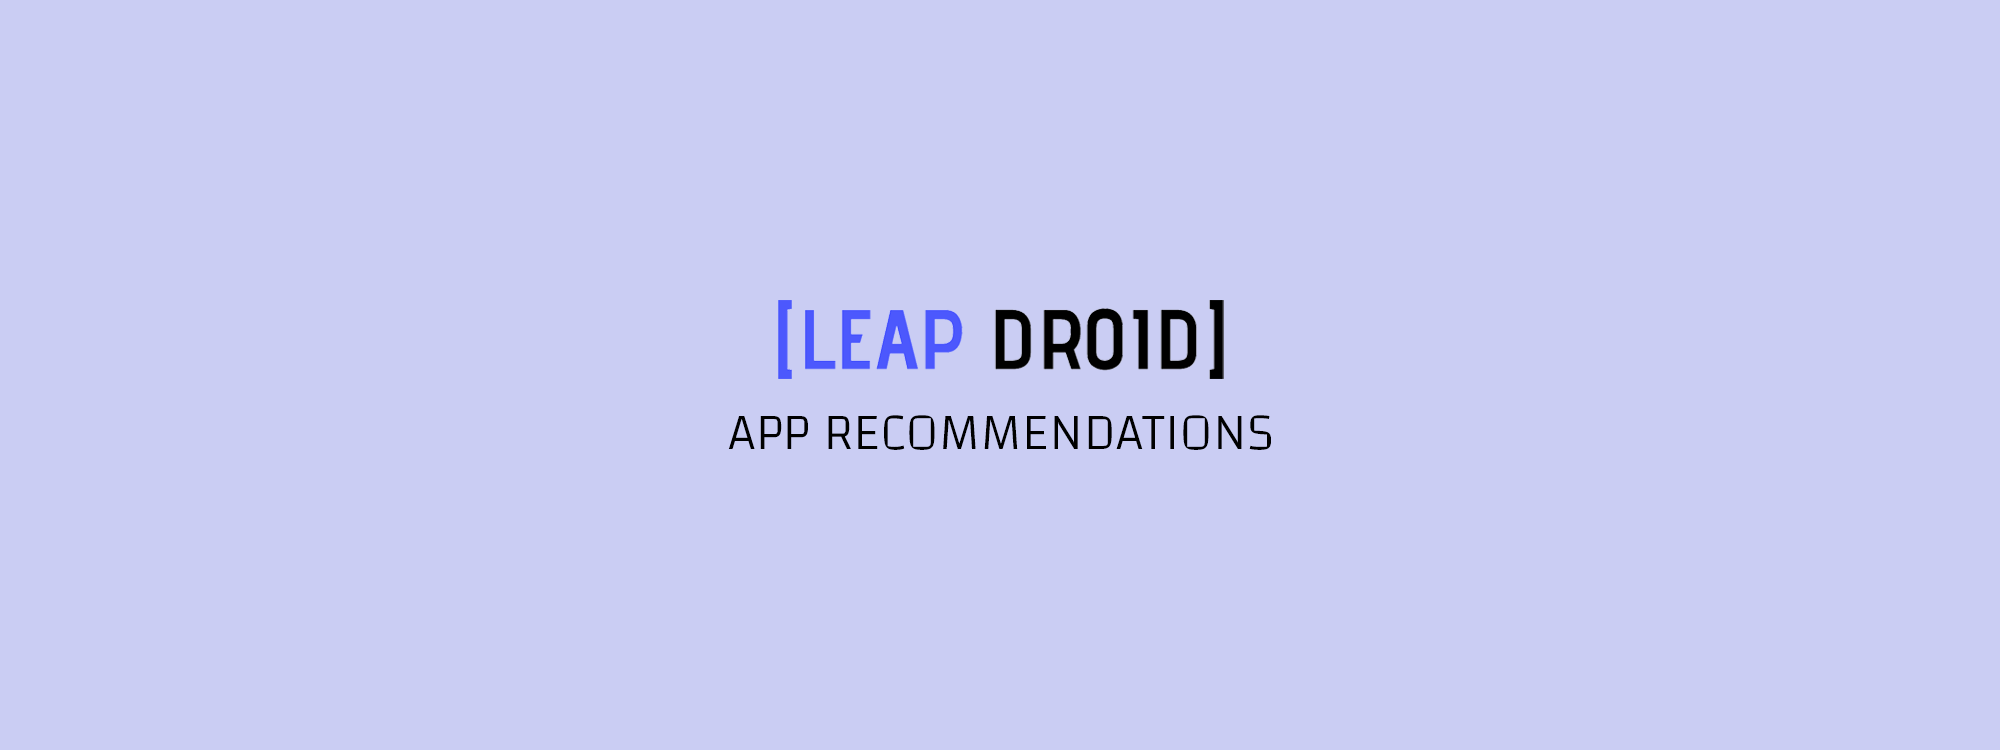 is leapdroid safe